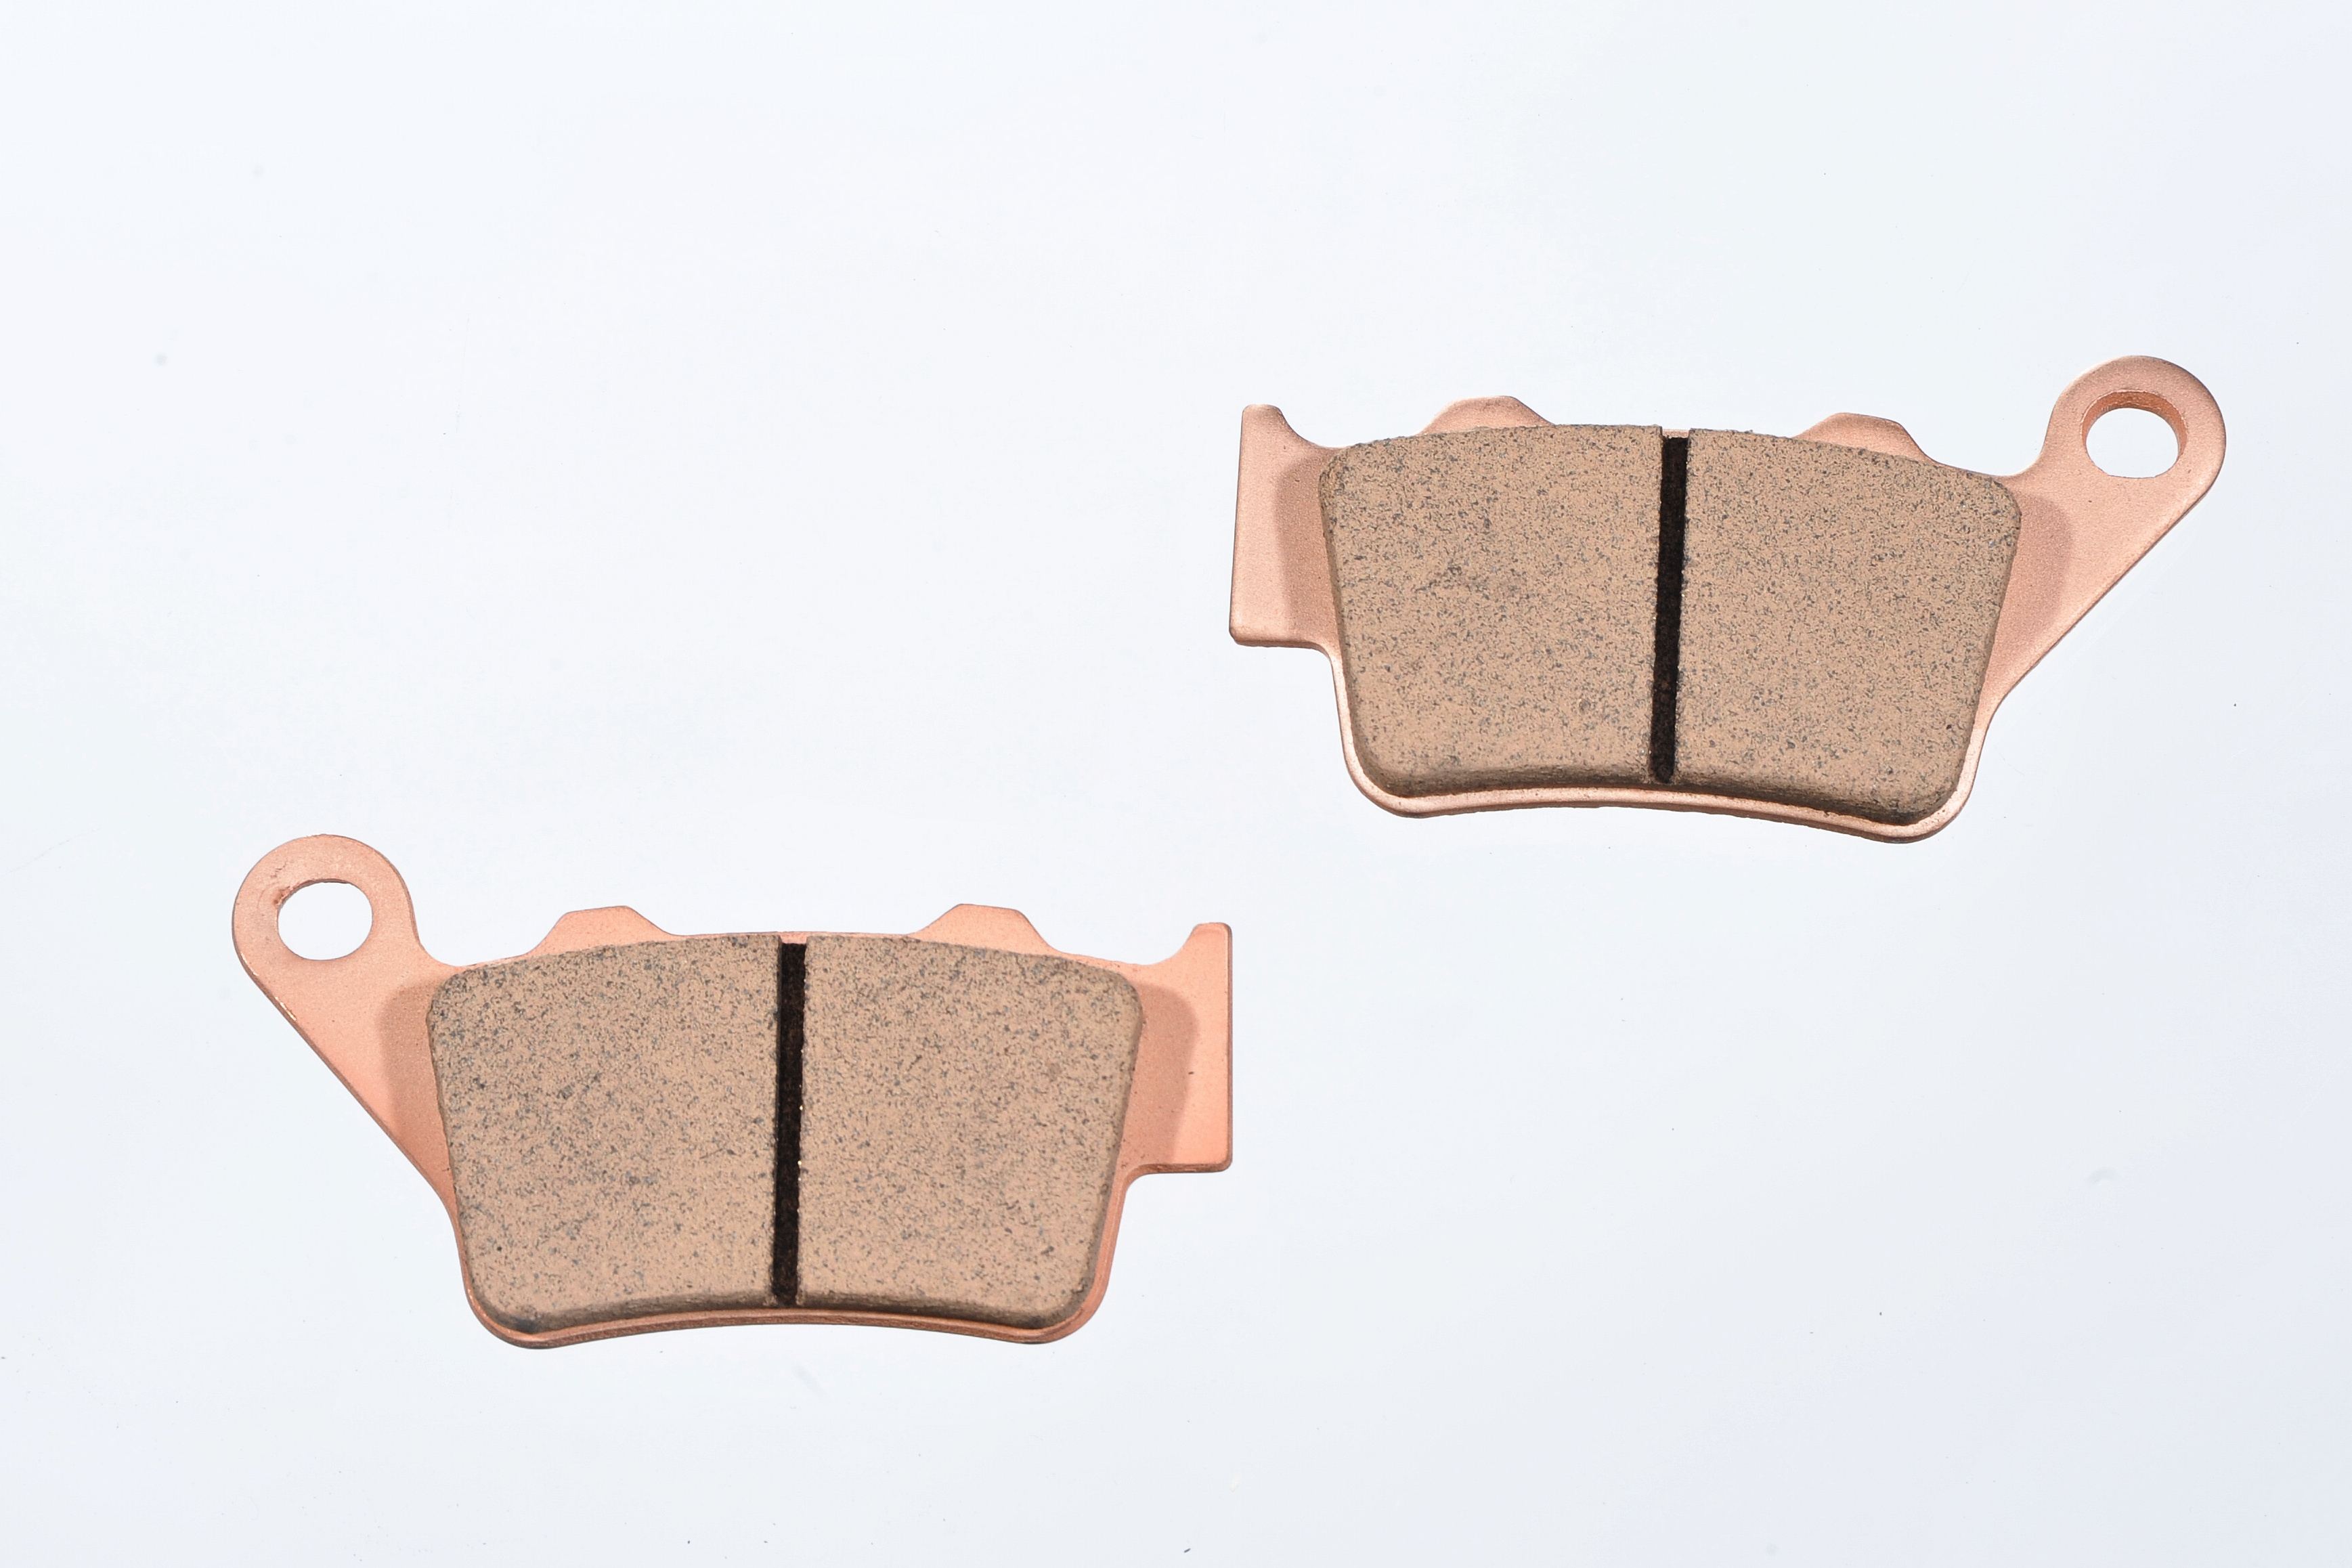 GOLDfren S33 Sintered Rear Brake Pads Fa174 Yamaha XSR 700 a ABS 2016 for sale online